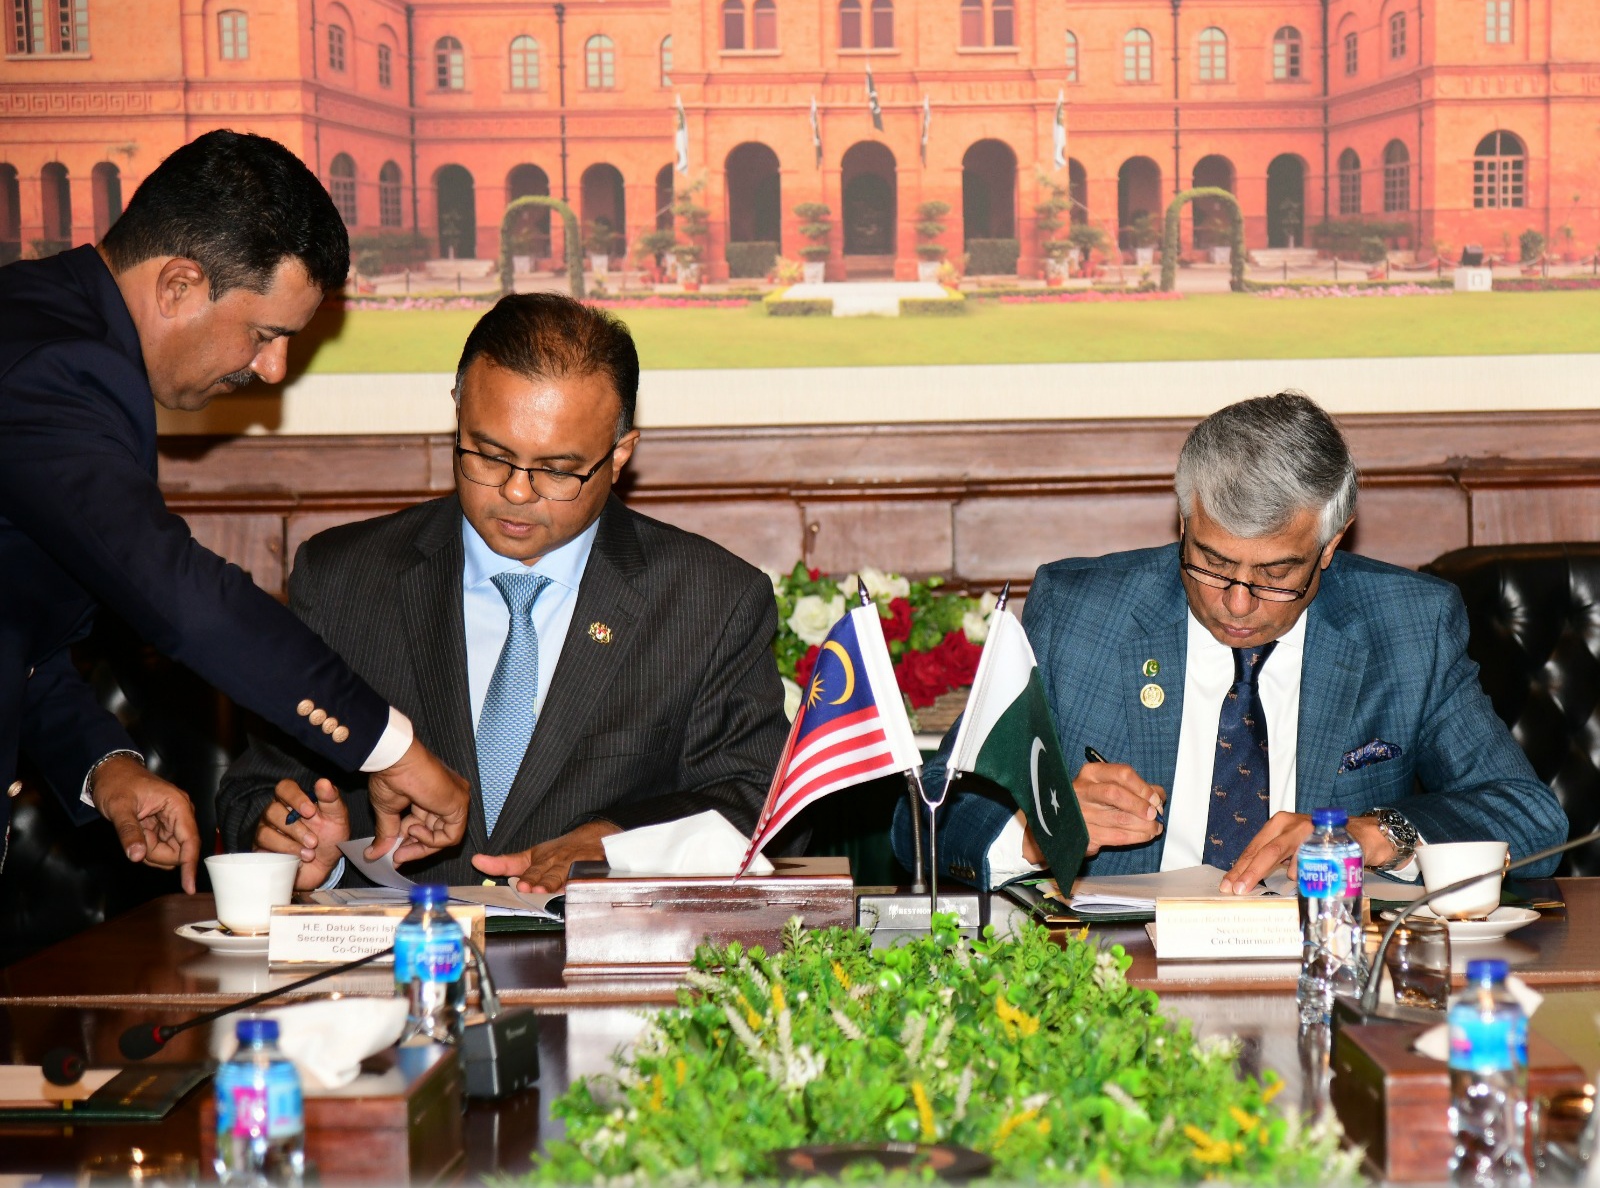 14th Meeting of Pakistan-Malaysia Joint Committee on Defence Cooperation (JCDC) was held in Rawalpindi.